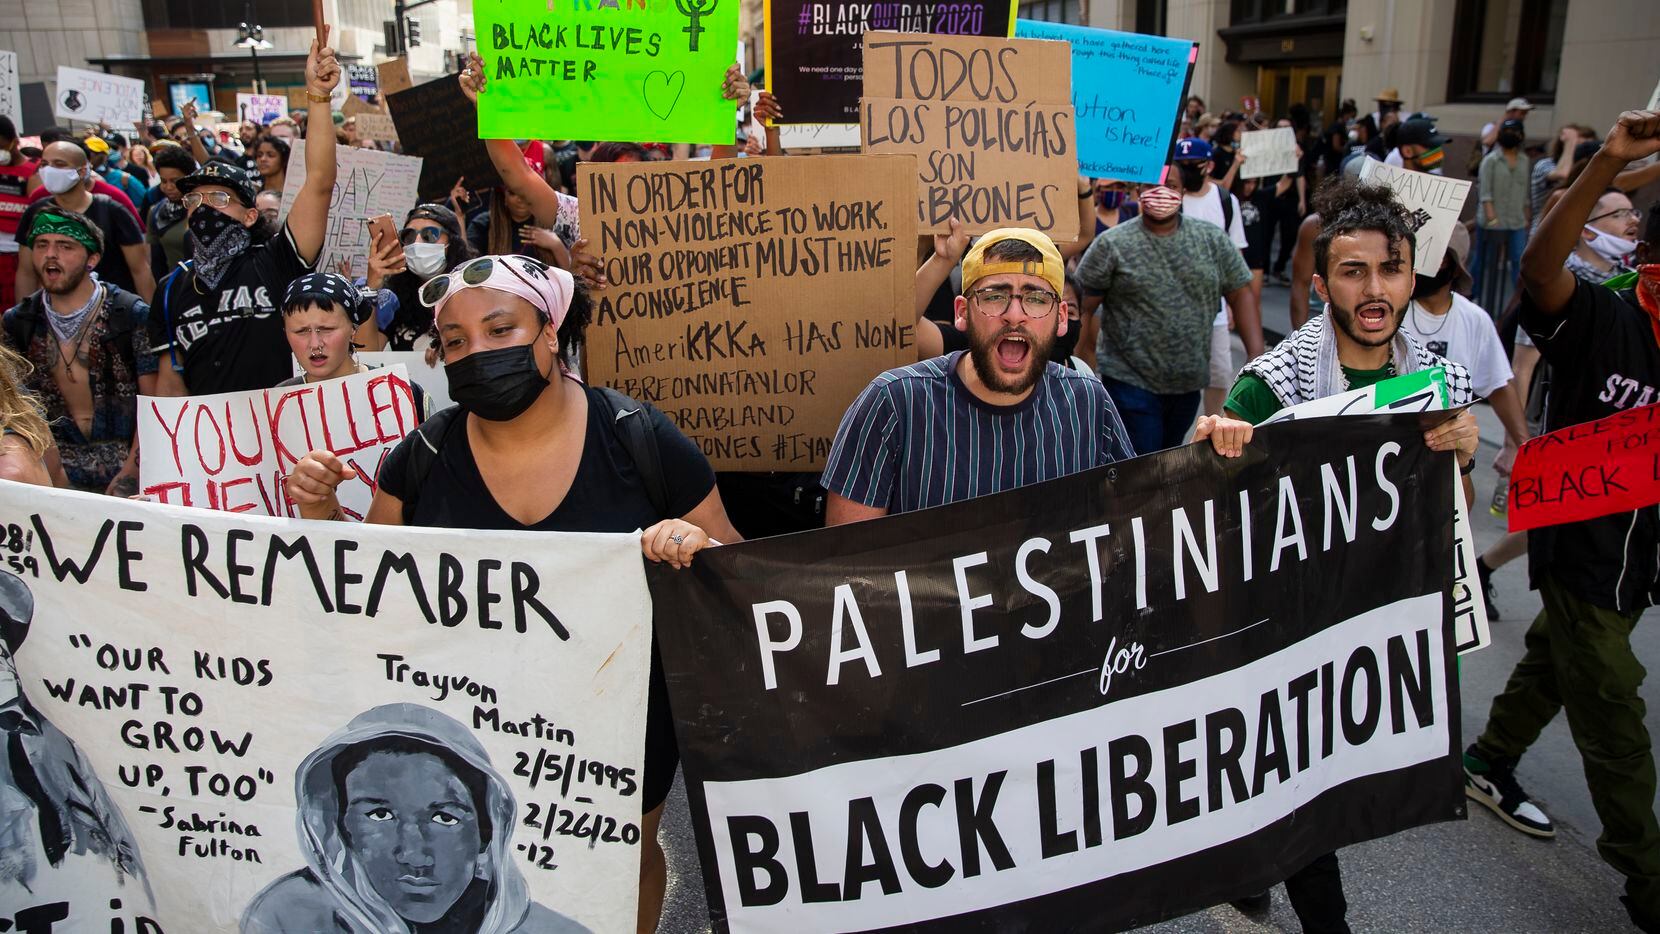 Finding common ground in human rights, pro-Palestinian activists build coalition with Movement for Black Lives